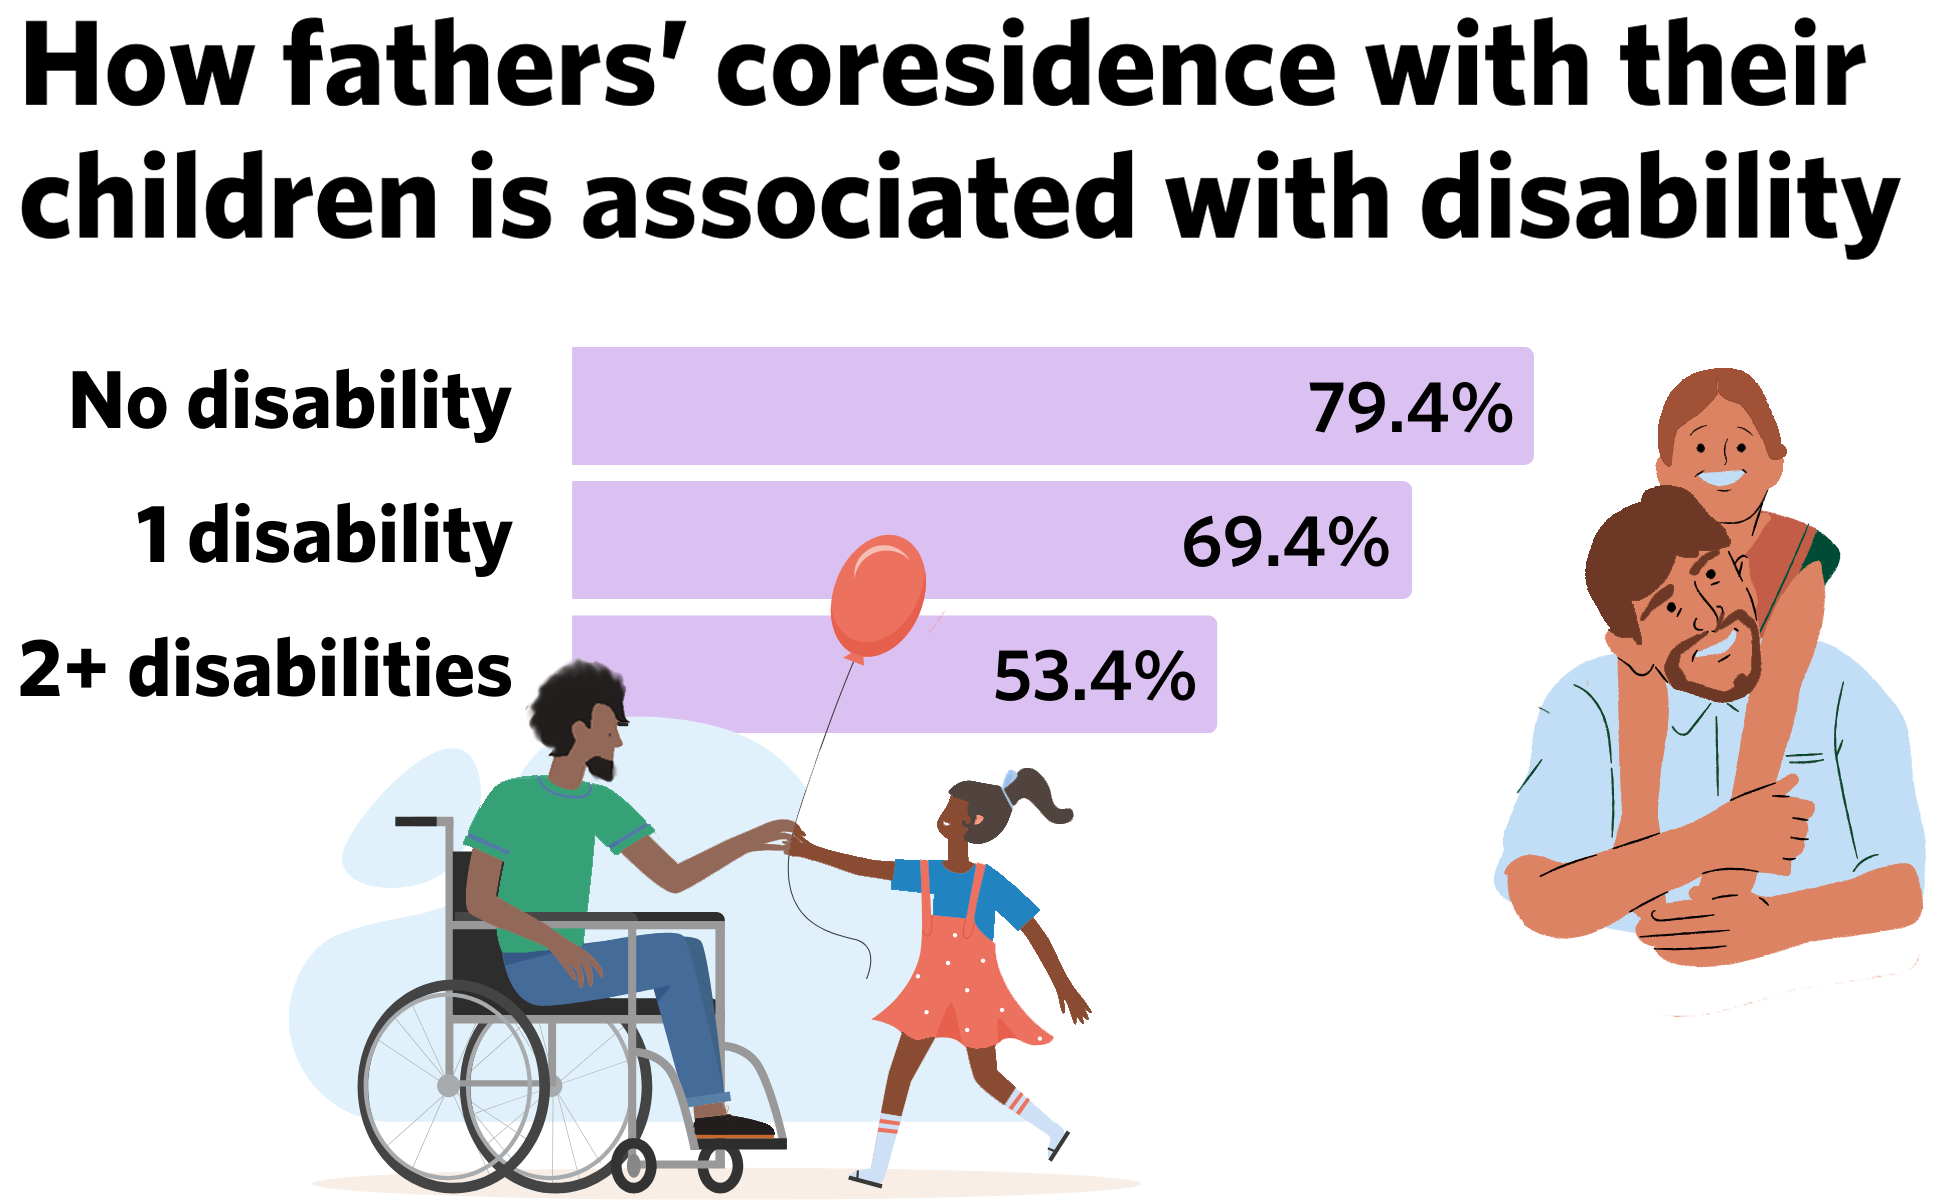 How fathers’ coresidence with their children is associated with disability